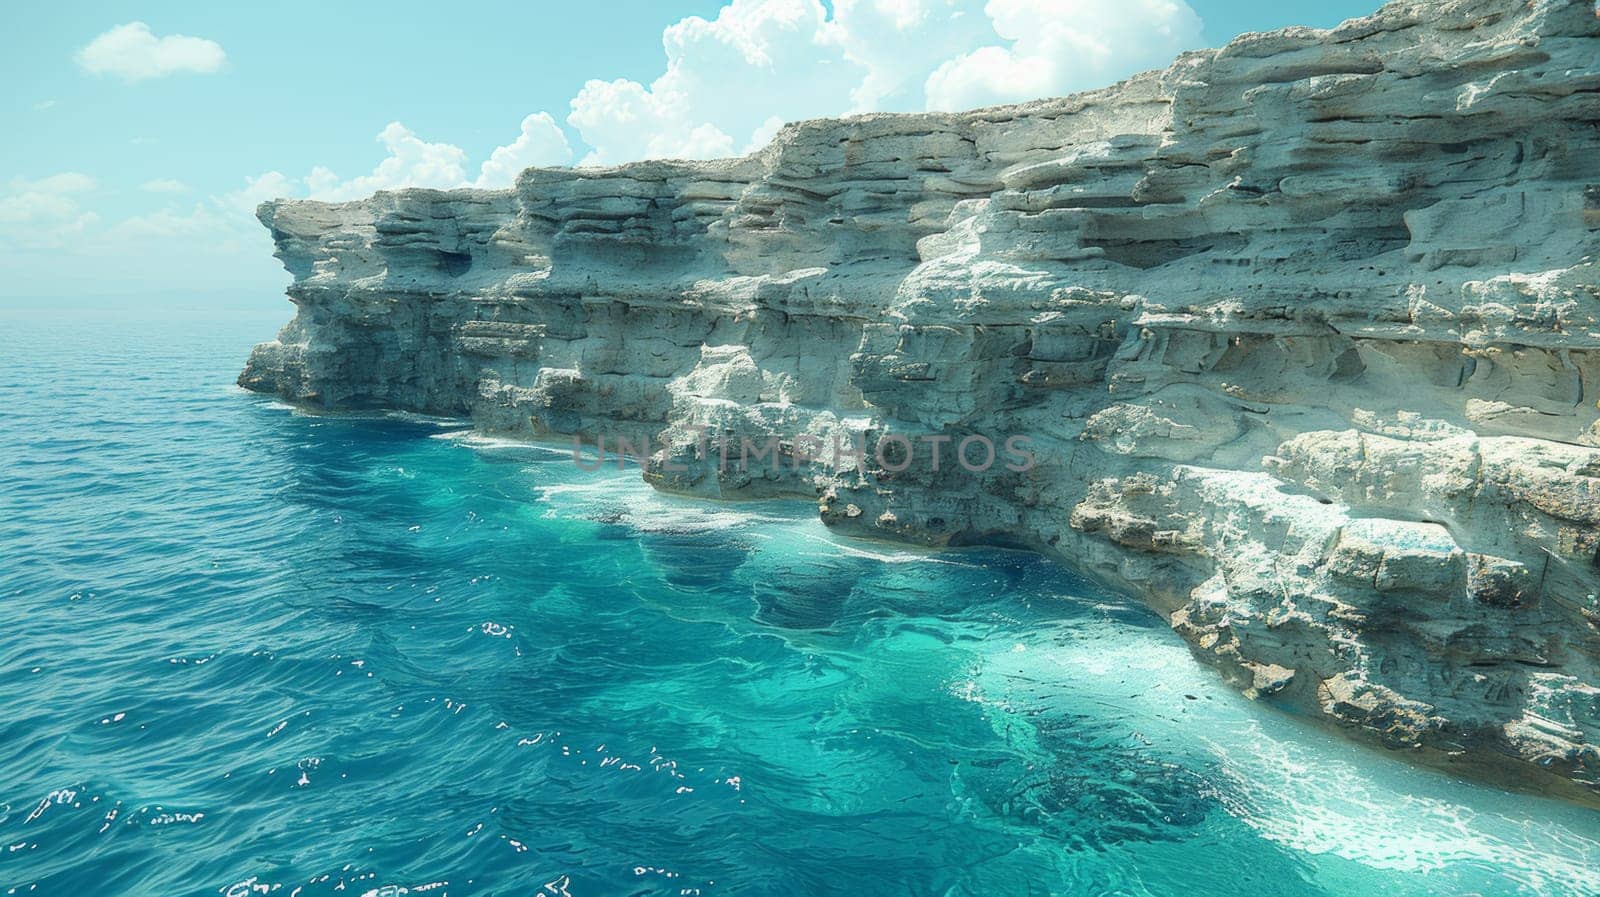 A large cliff that is in the ocean with a boat, AI by starush